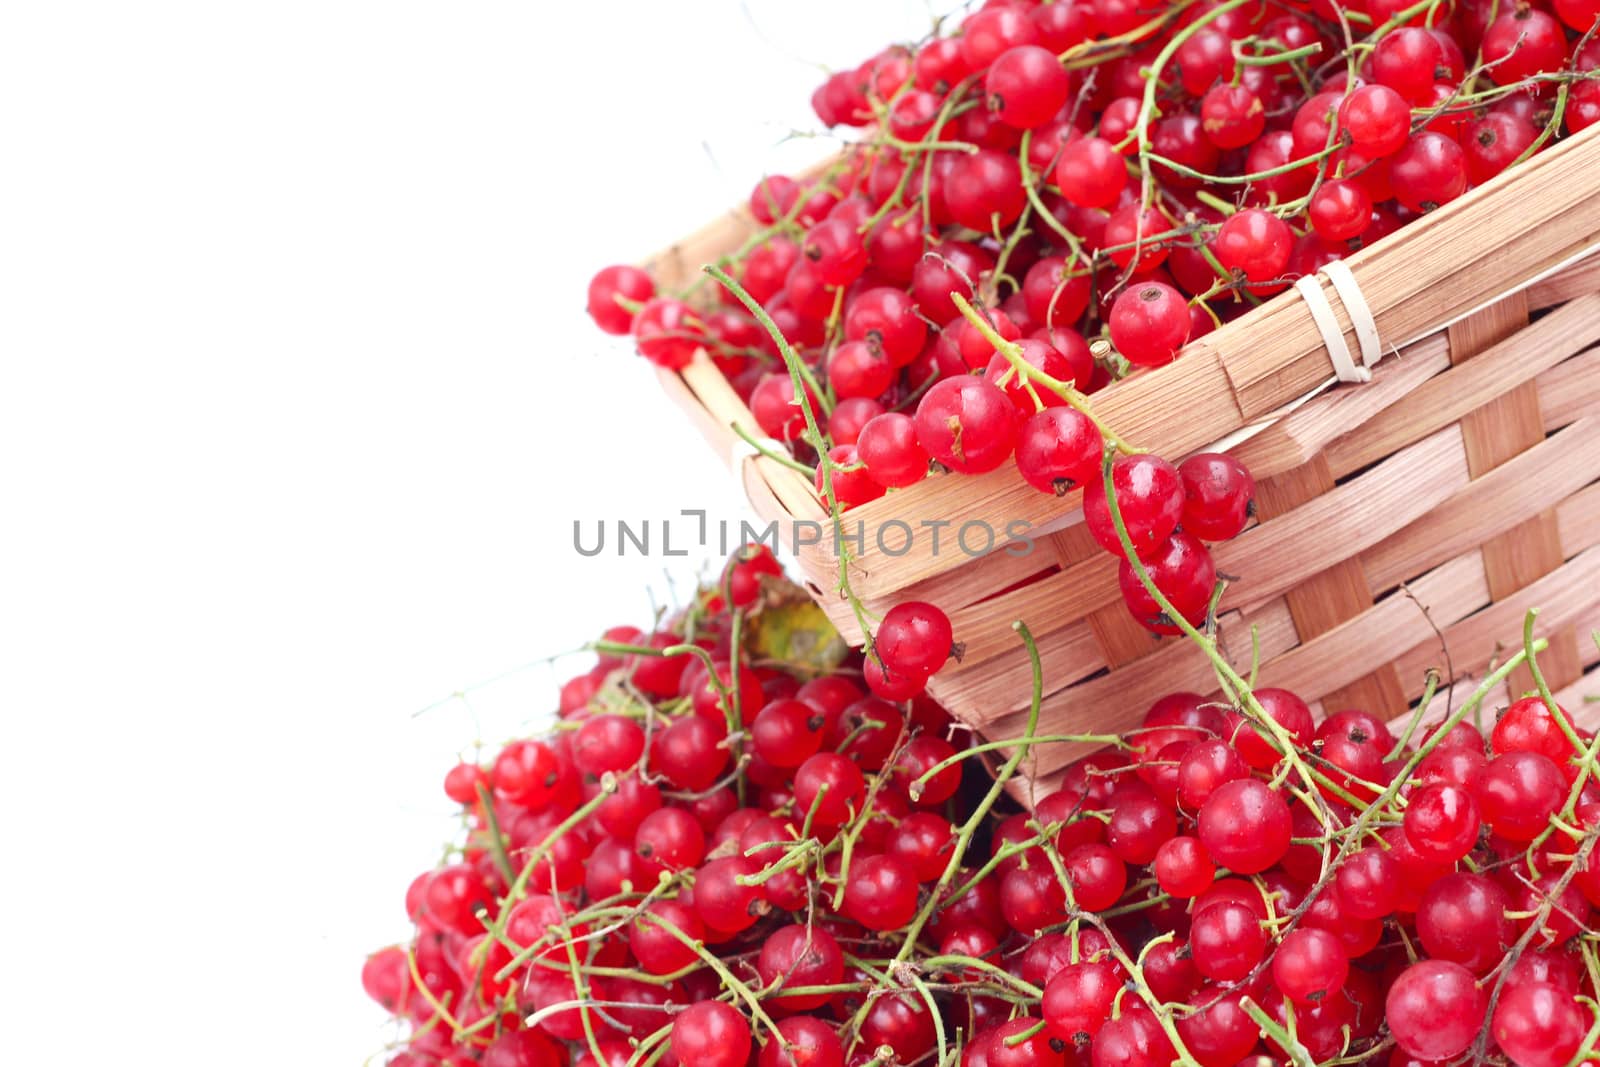 Harvested red currant by destillat